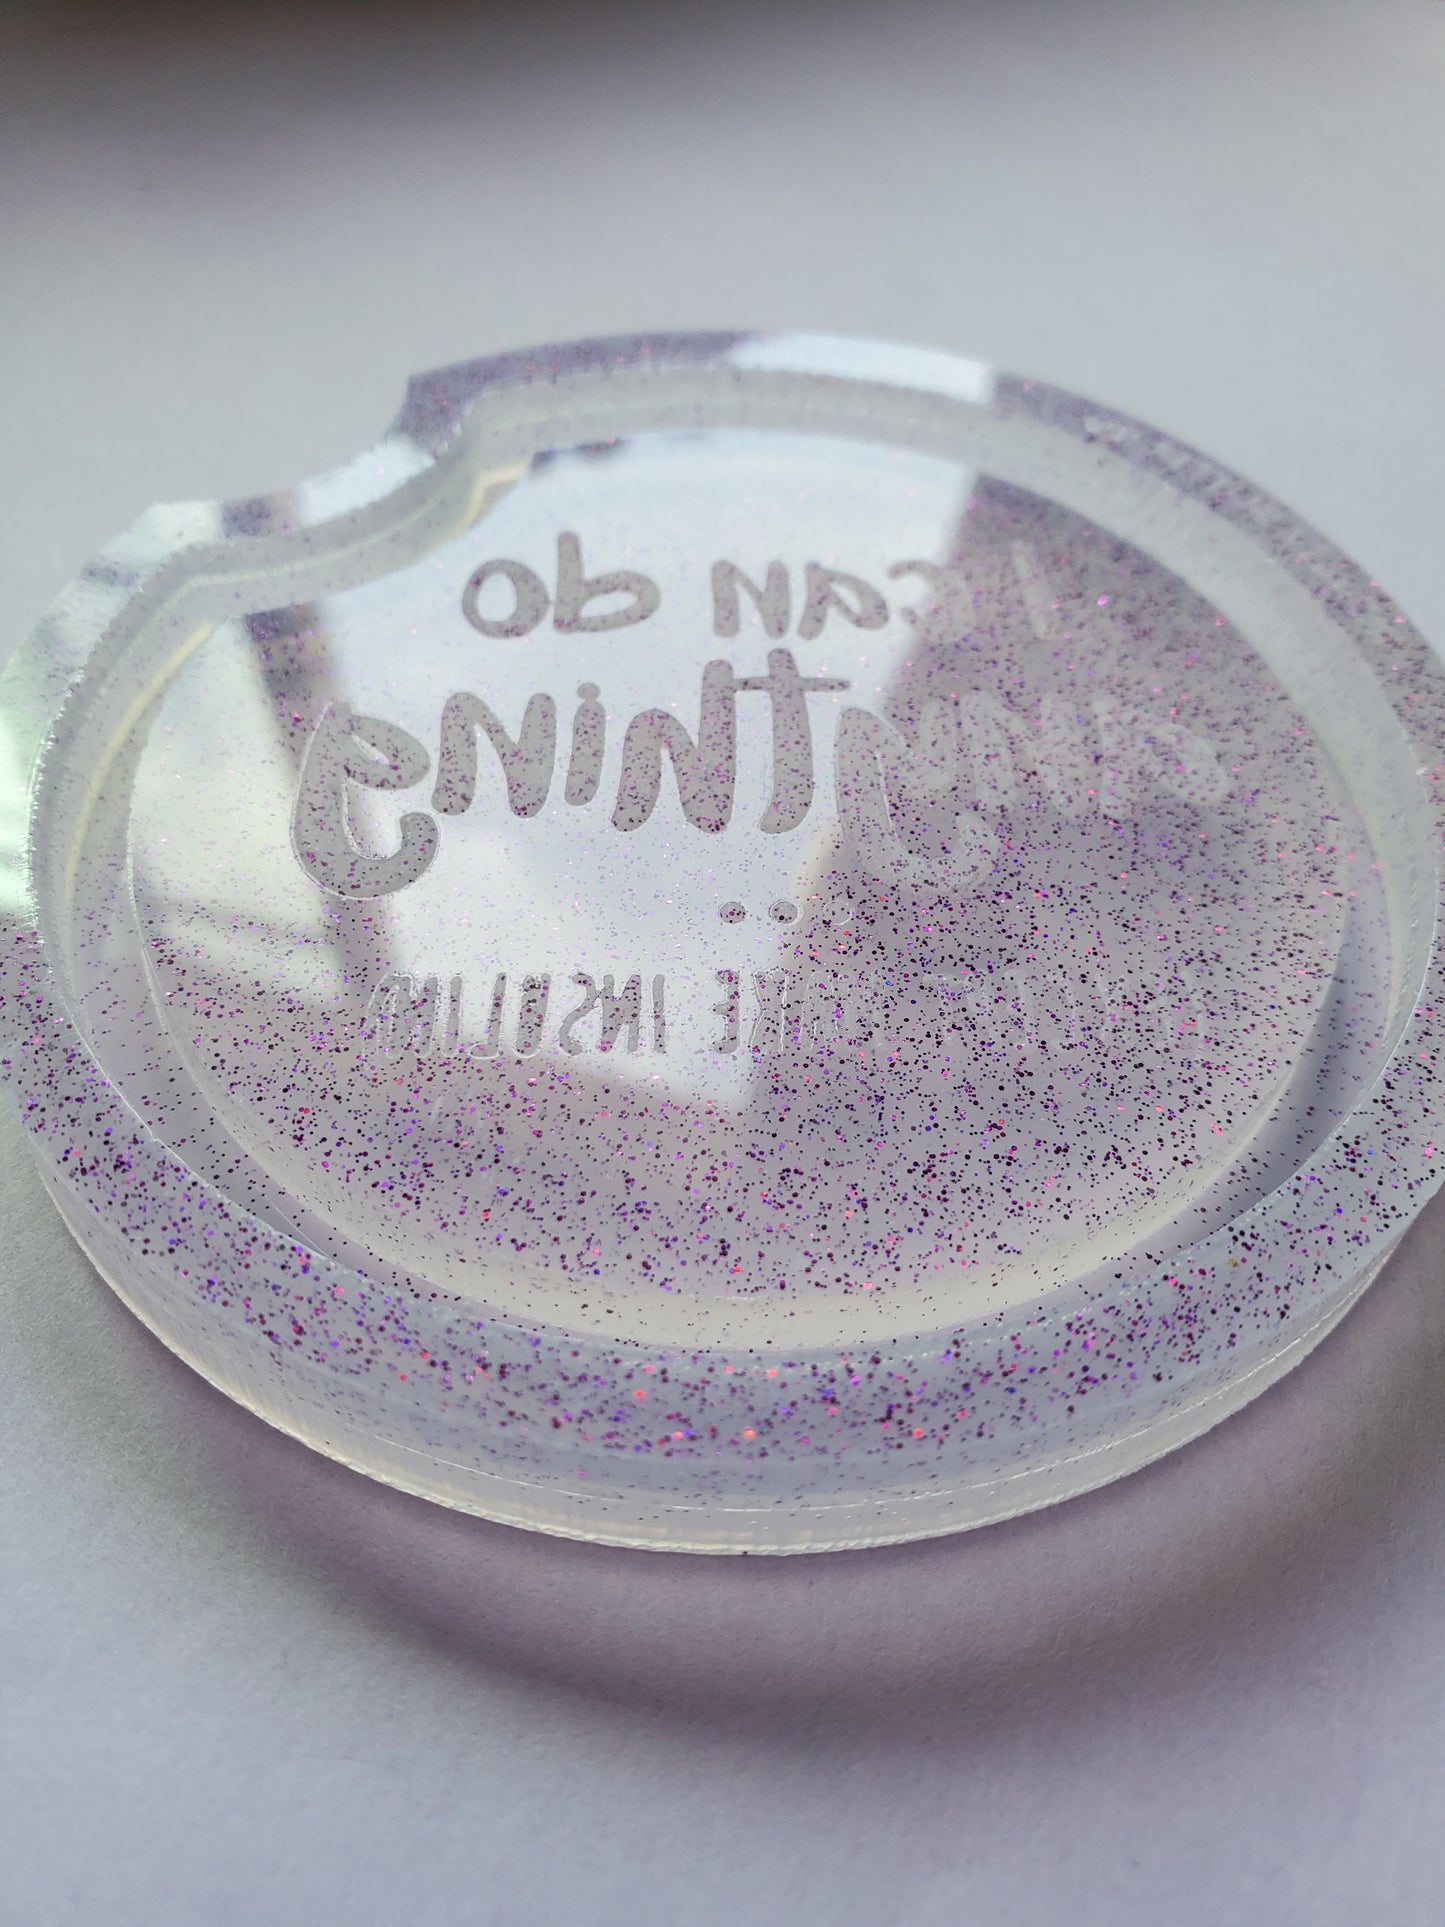 "I can do anything except make insulin" lipped coaster mold